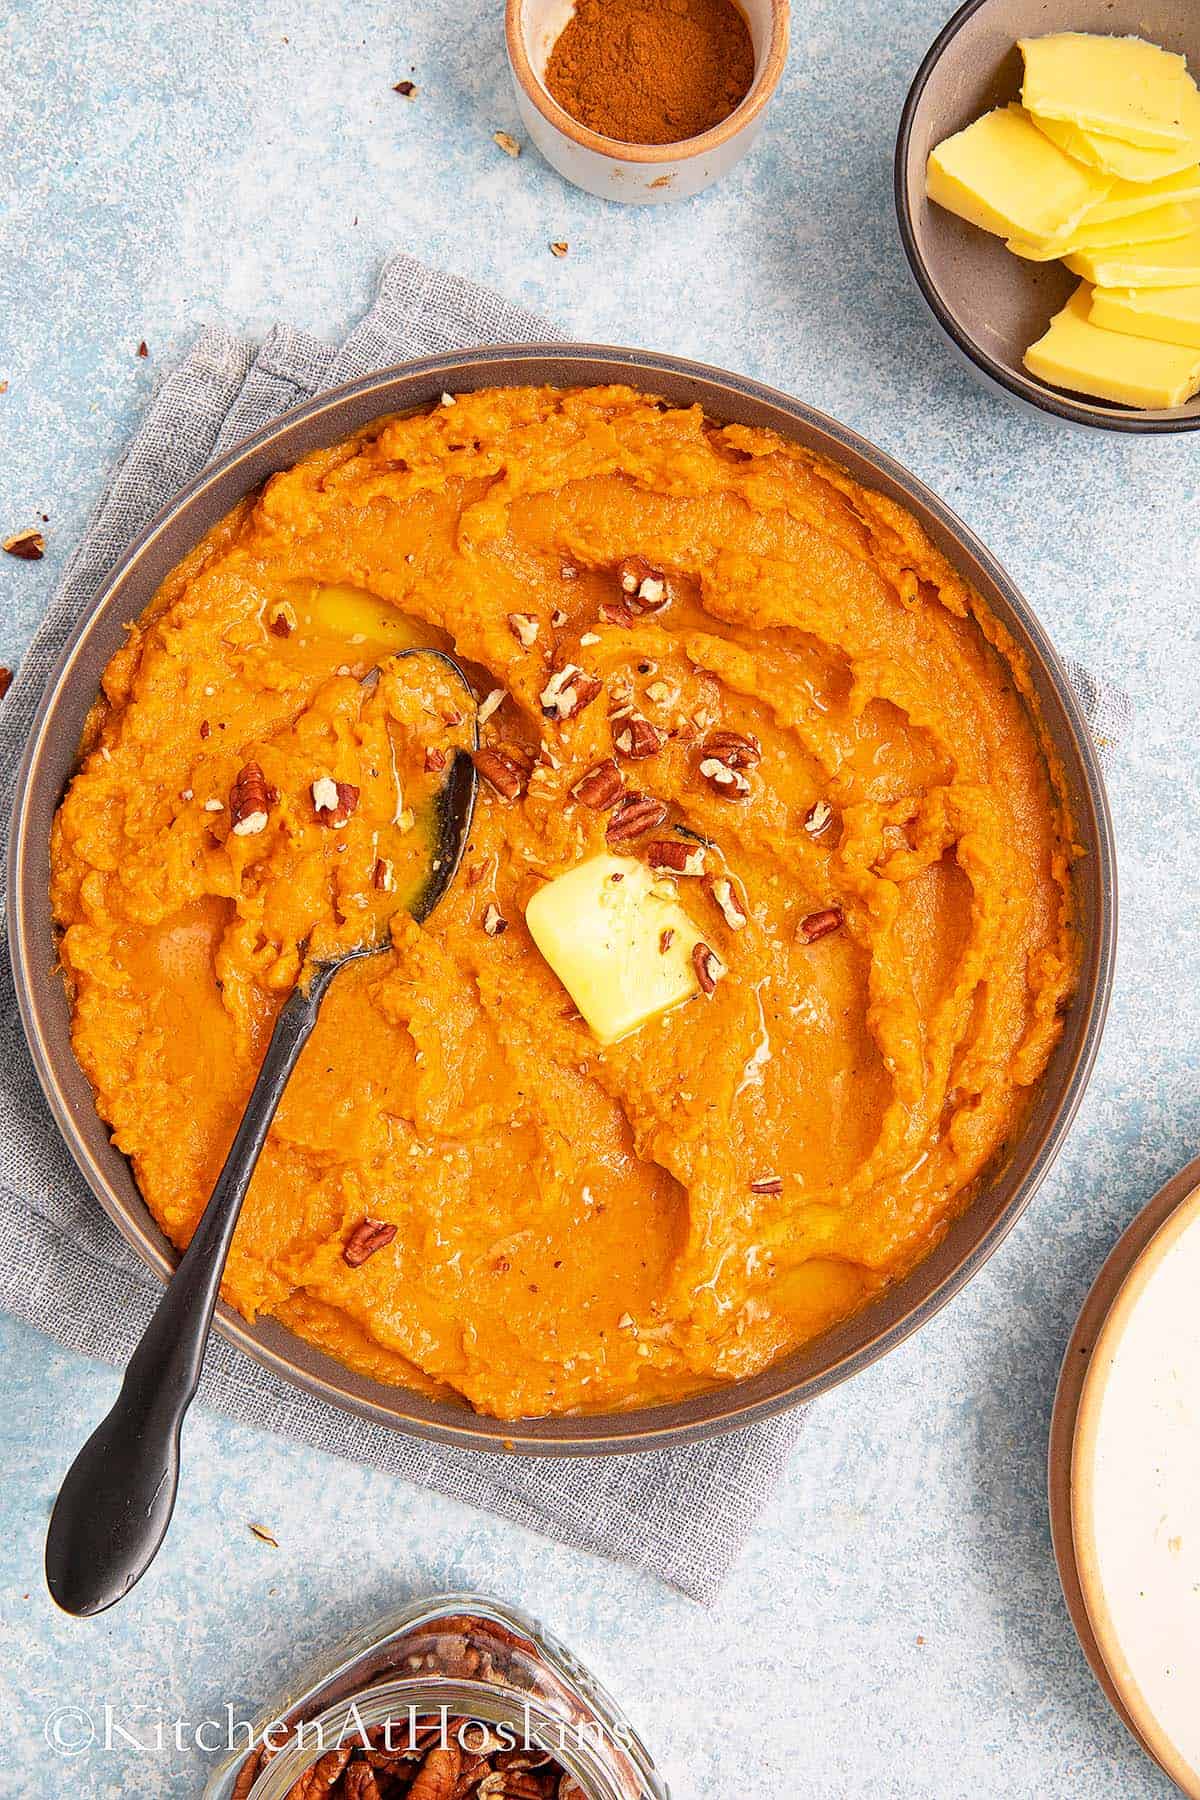  round platter filled with mashed sweet potatoes topped with butter, pecans along with a spoon.